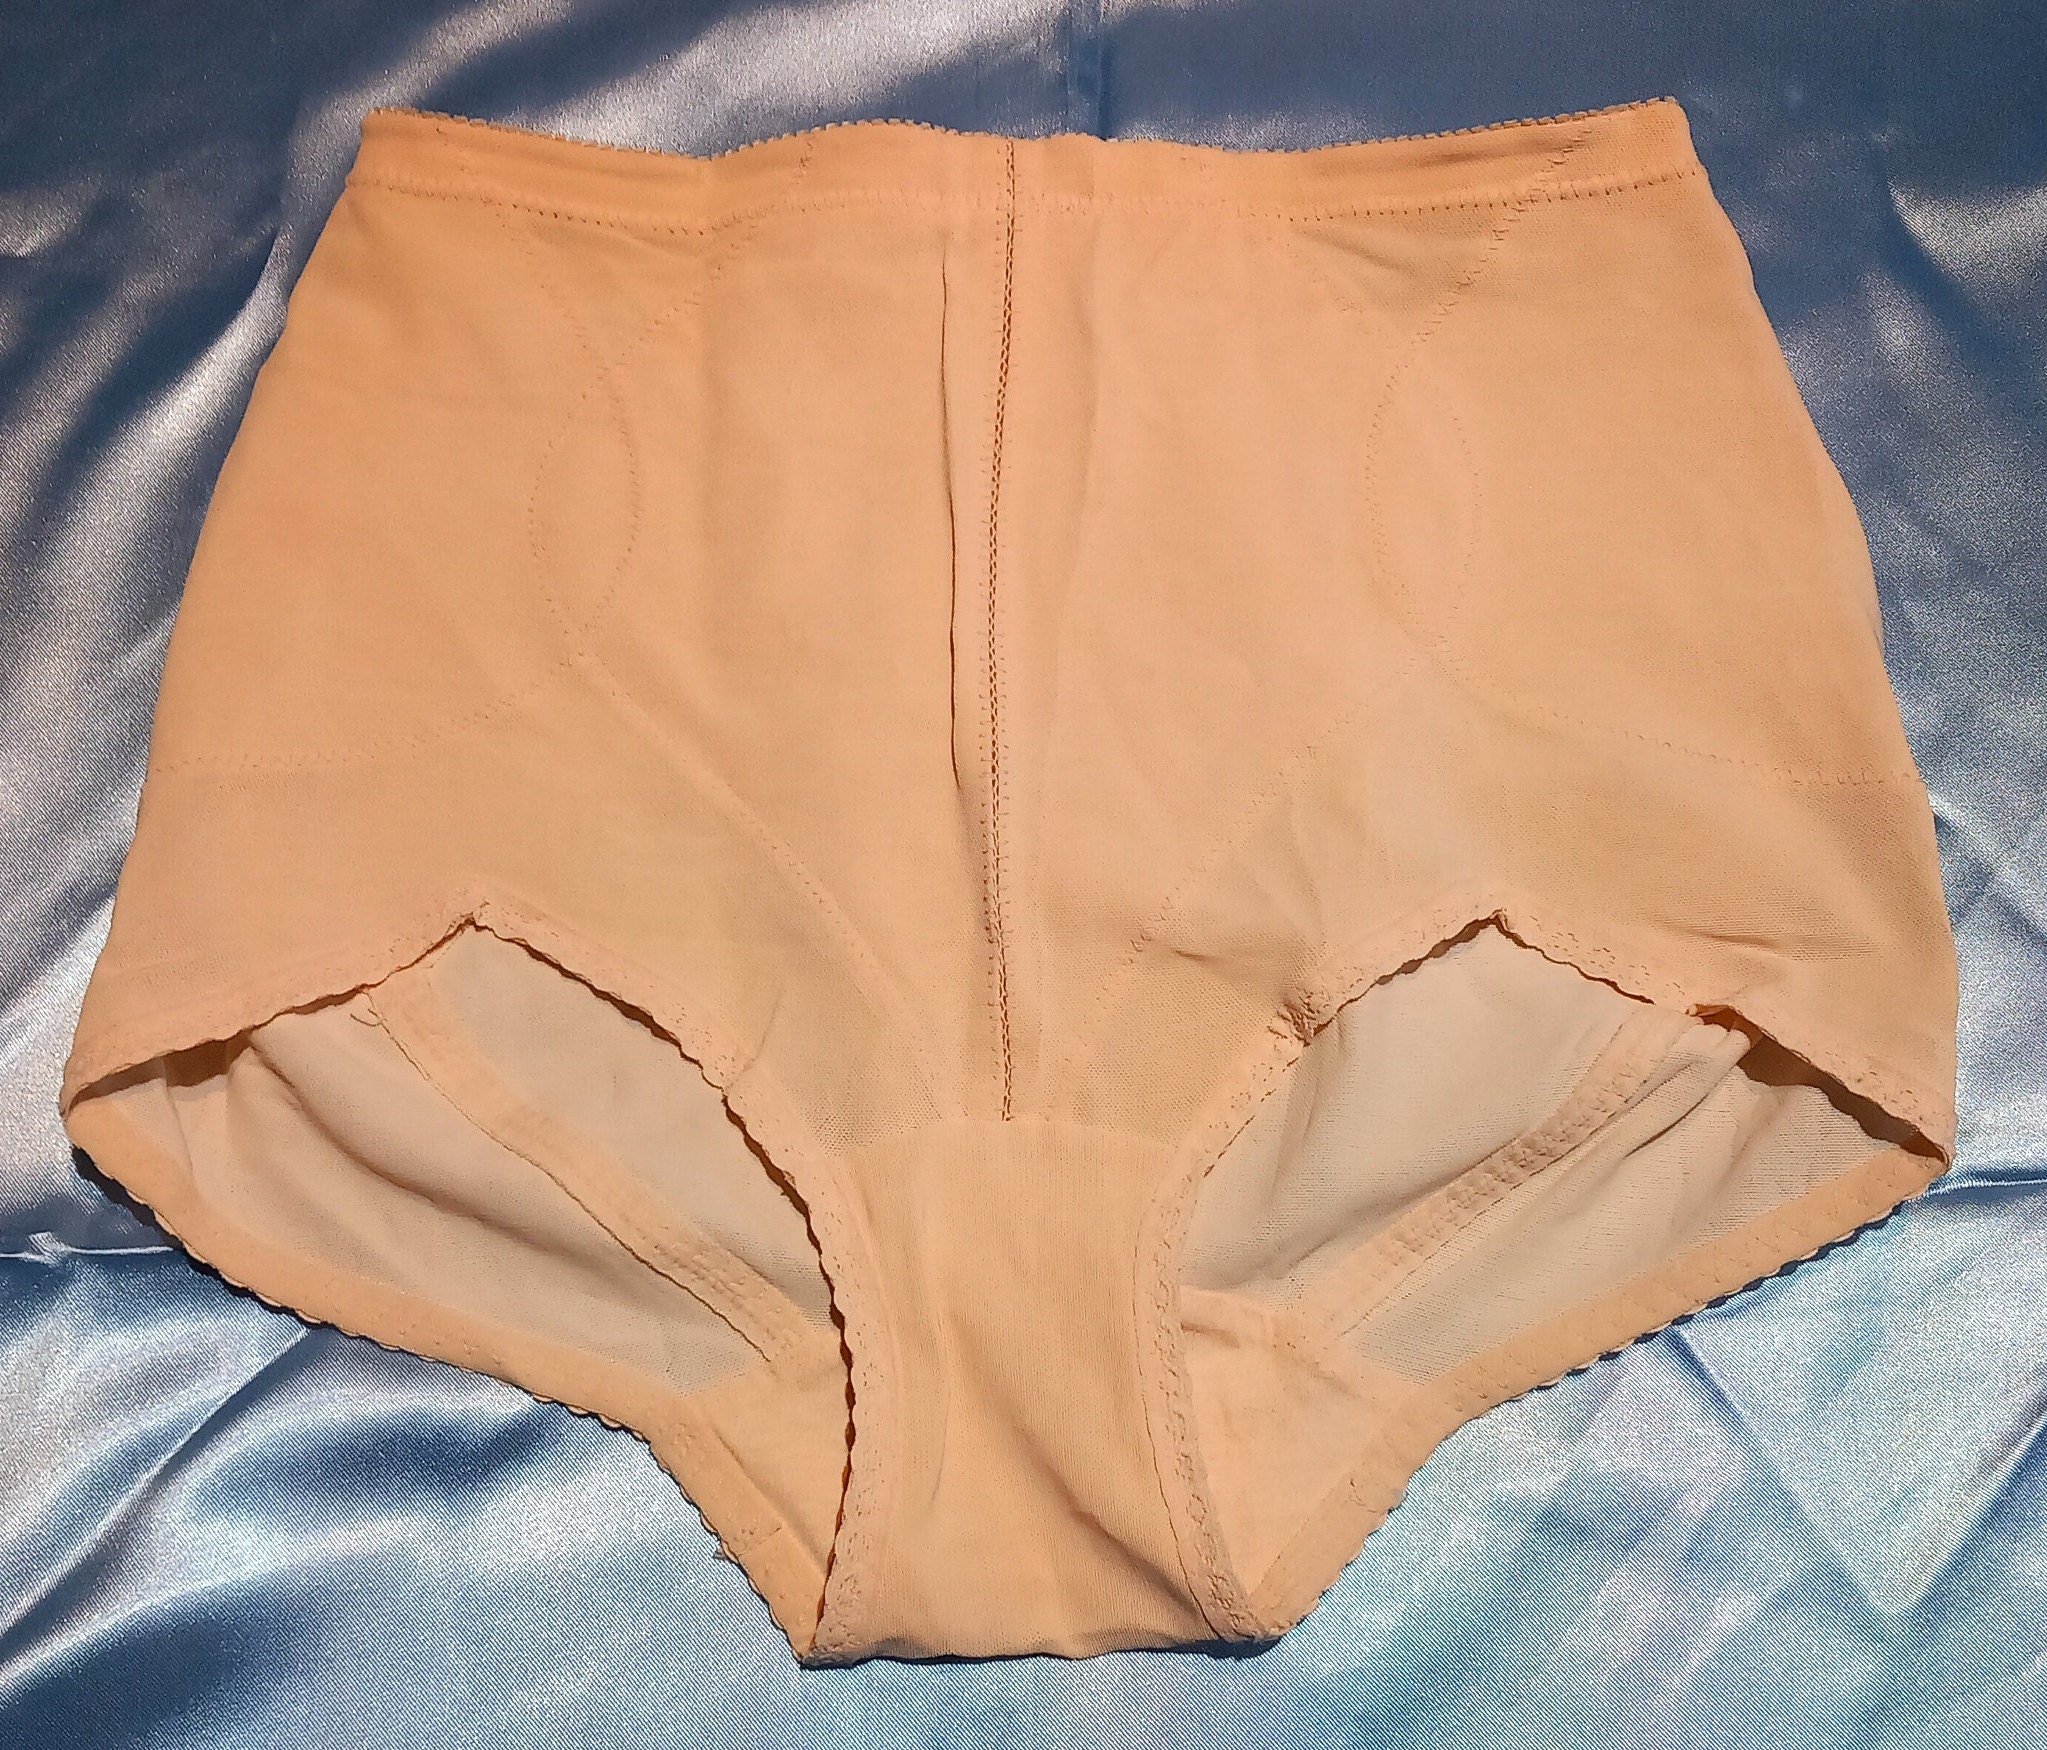 Chantelle French Vintage Peach Panties Vintage Waist Size 64 up to 70cm  small Lingerie Collectors Miederhose -  Hong Kong